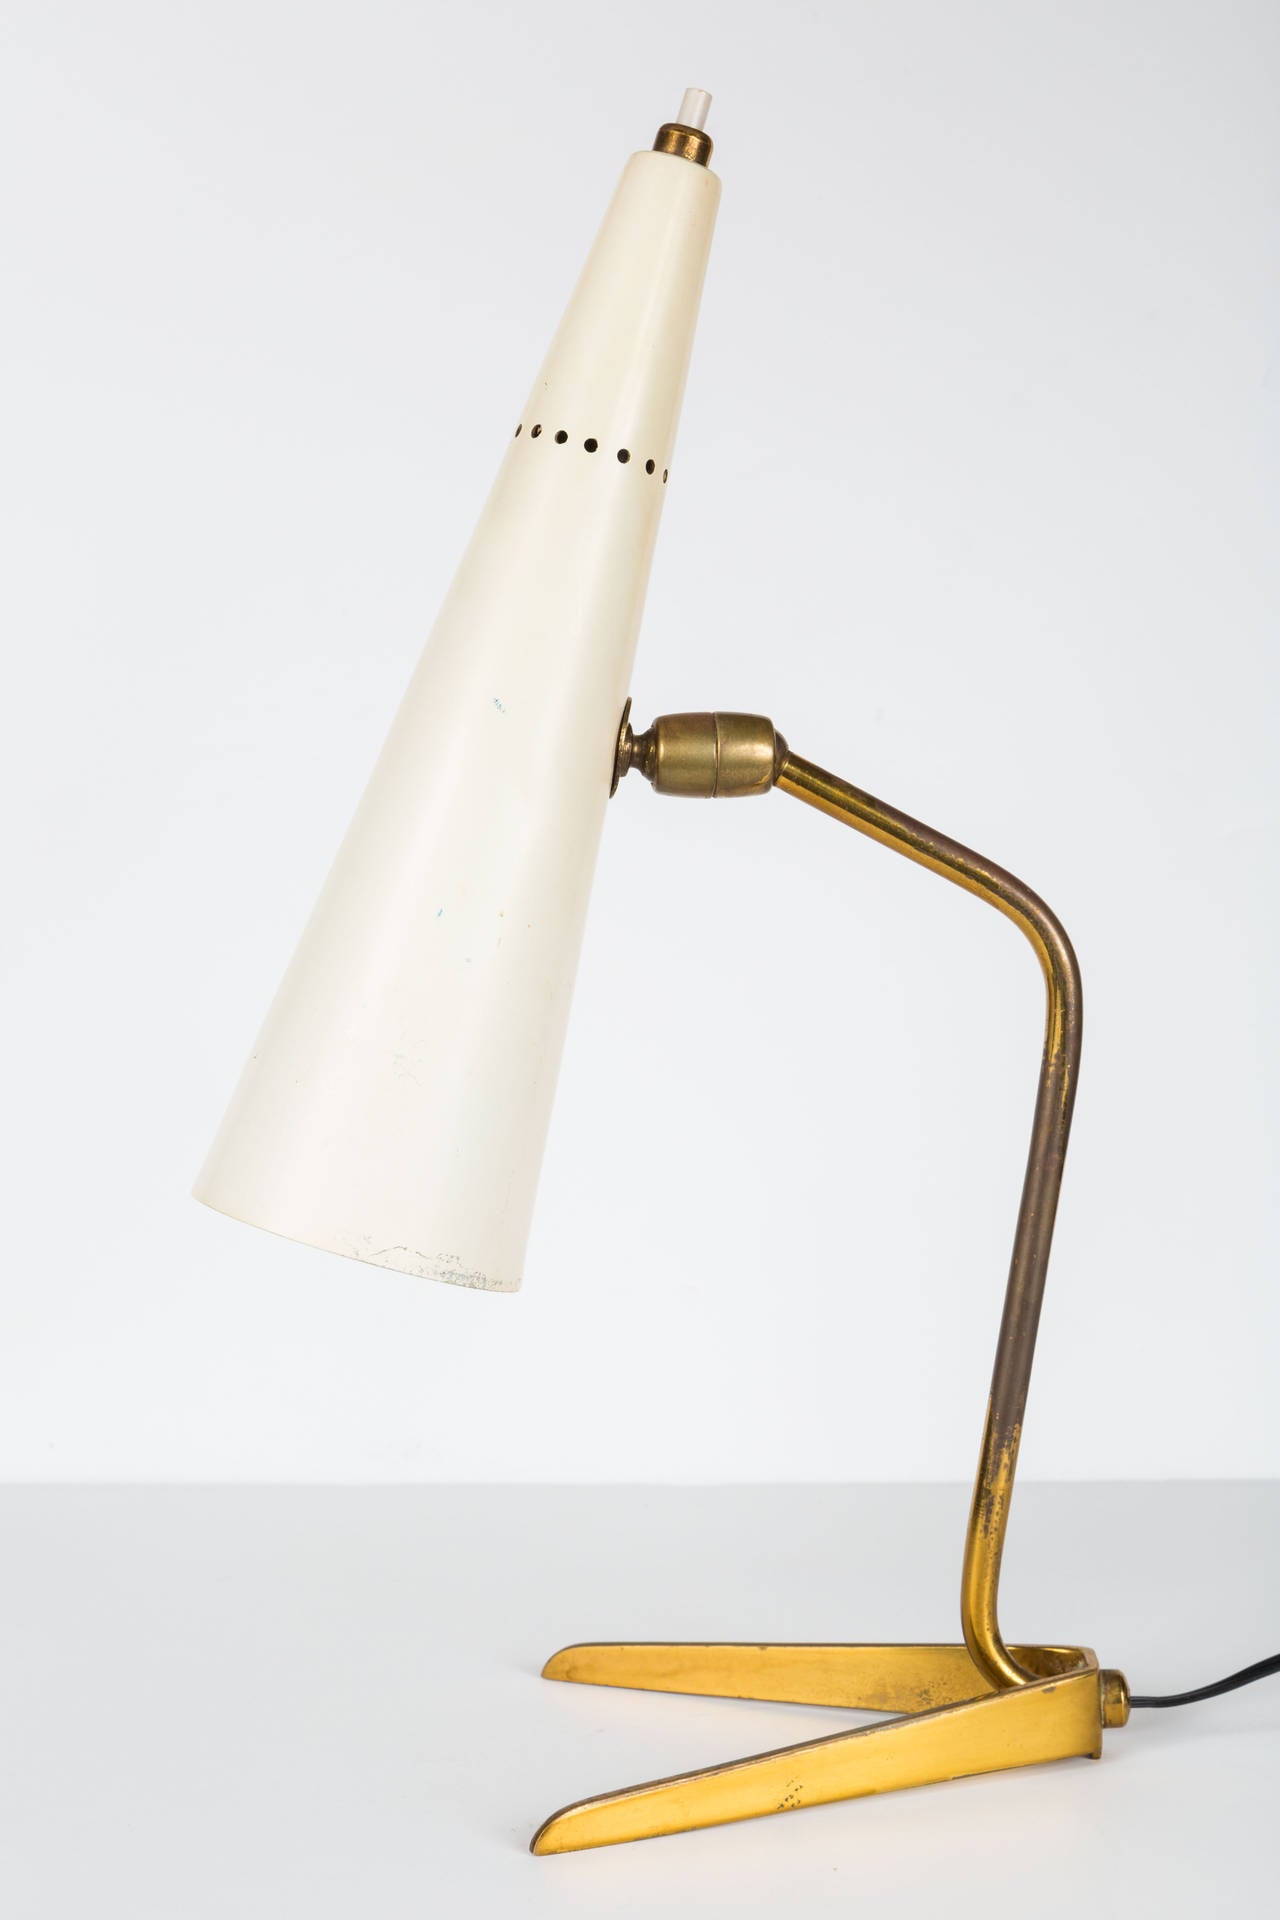 White cone adjustable table lamp with patinated brass arm and legs.